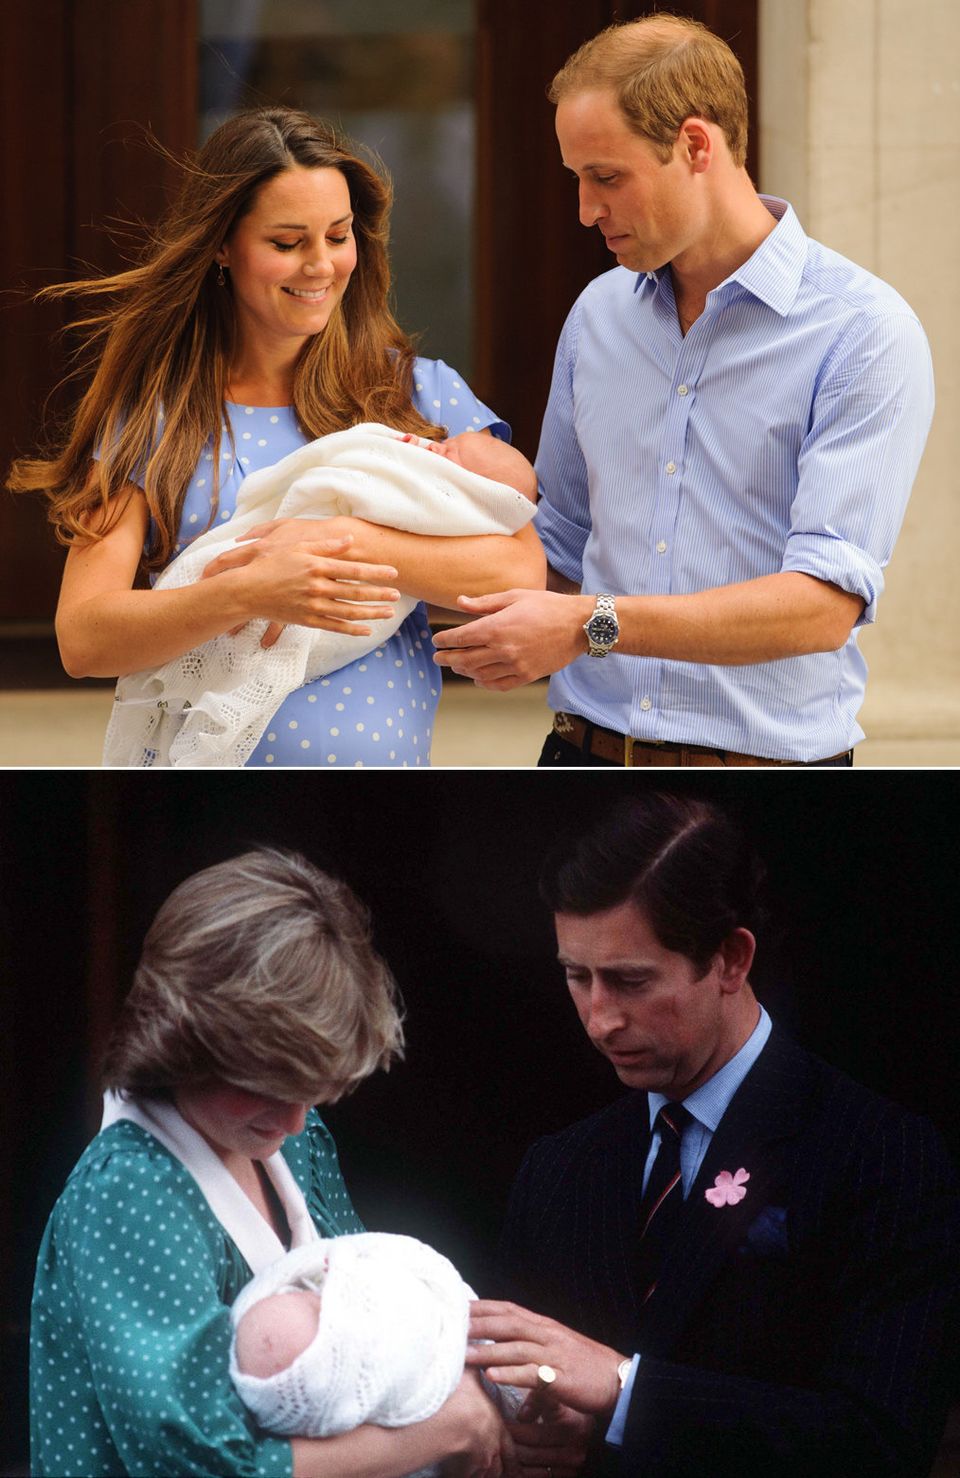 William and Kate 2013/Diana and Charles 1982